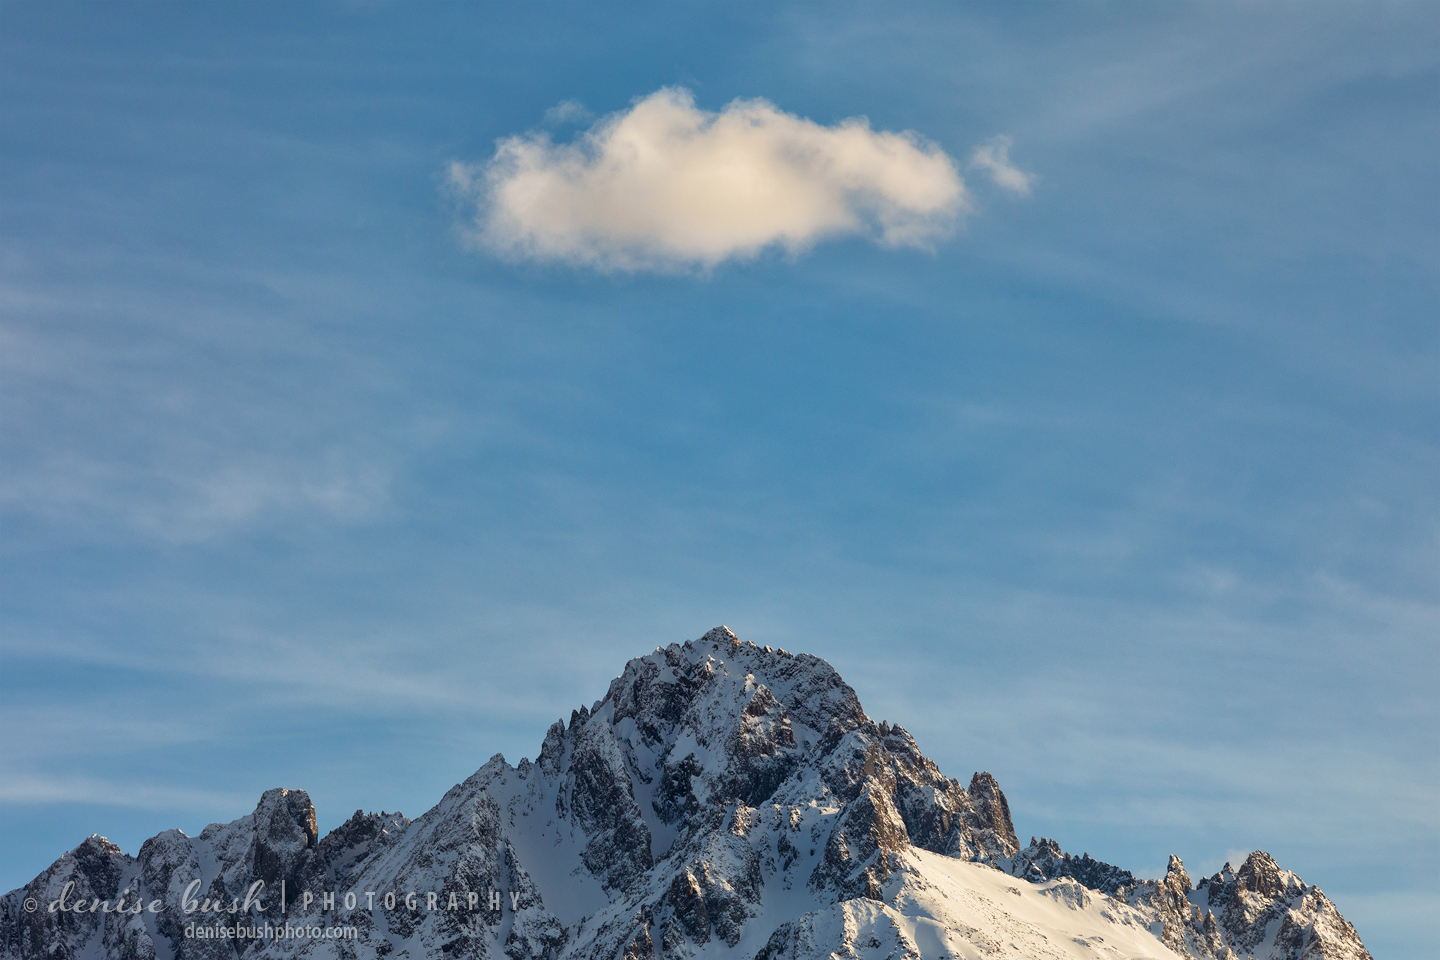 A cloud drifts over the peak of Mount Sneffels as if to dot it!